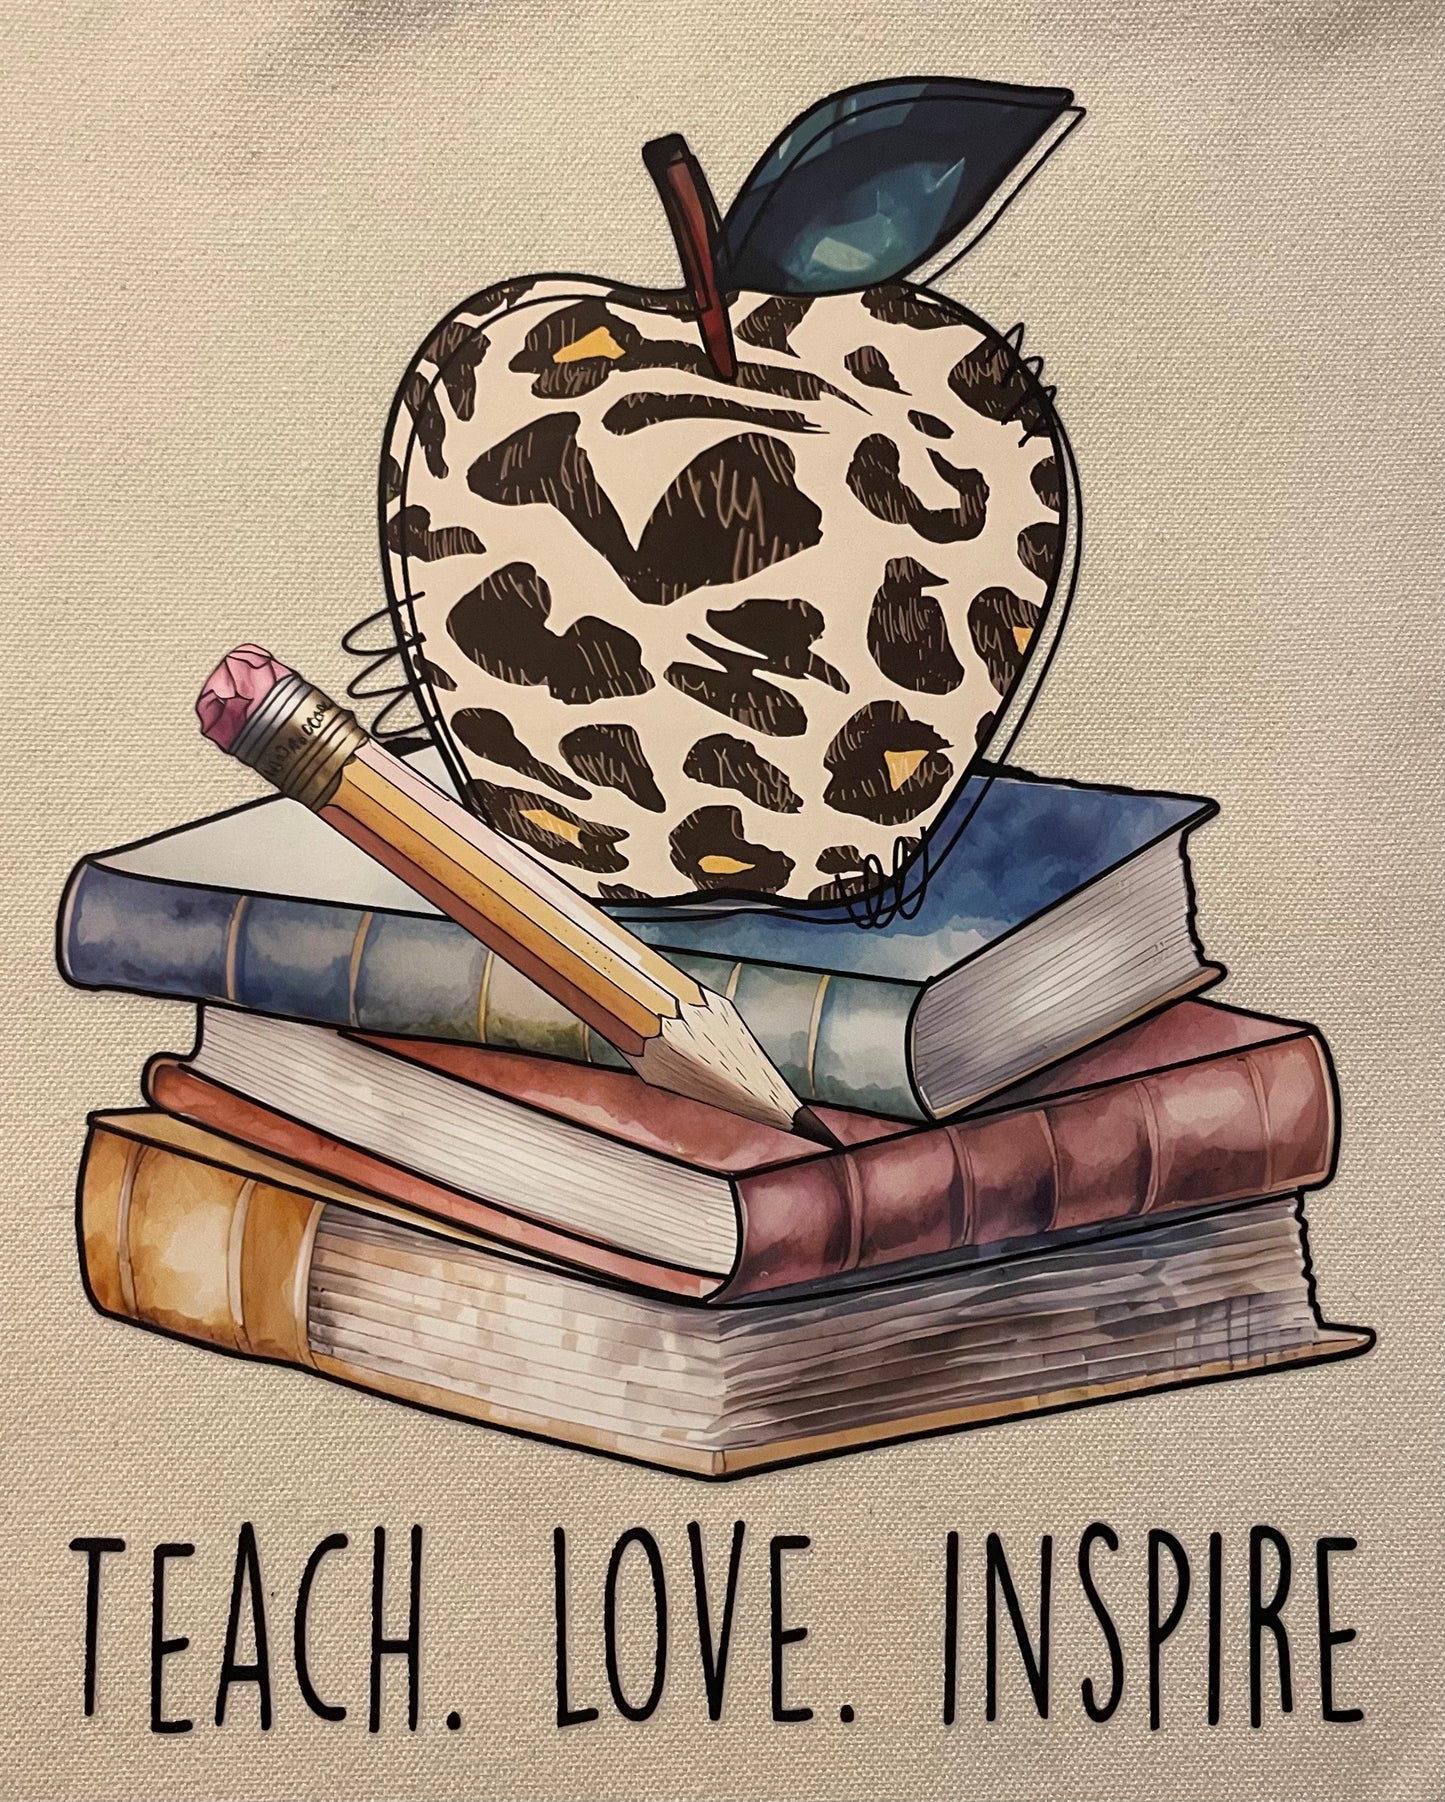 Customized Teacher Gifts, Personalized Gifts for Teachers, Teacher Gifts Canvas Tote Bag, Gifts for Teachers, Teacher’s Gift, Unique Gifts for Teachers, Teach, Love, Inspire